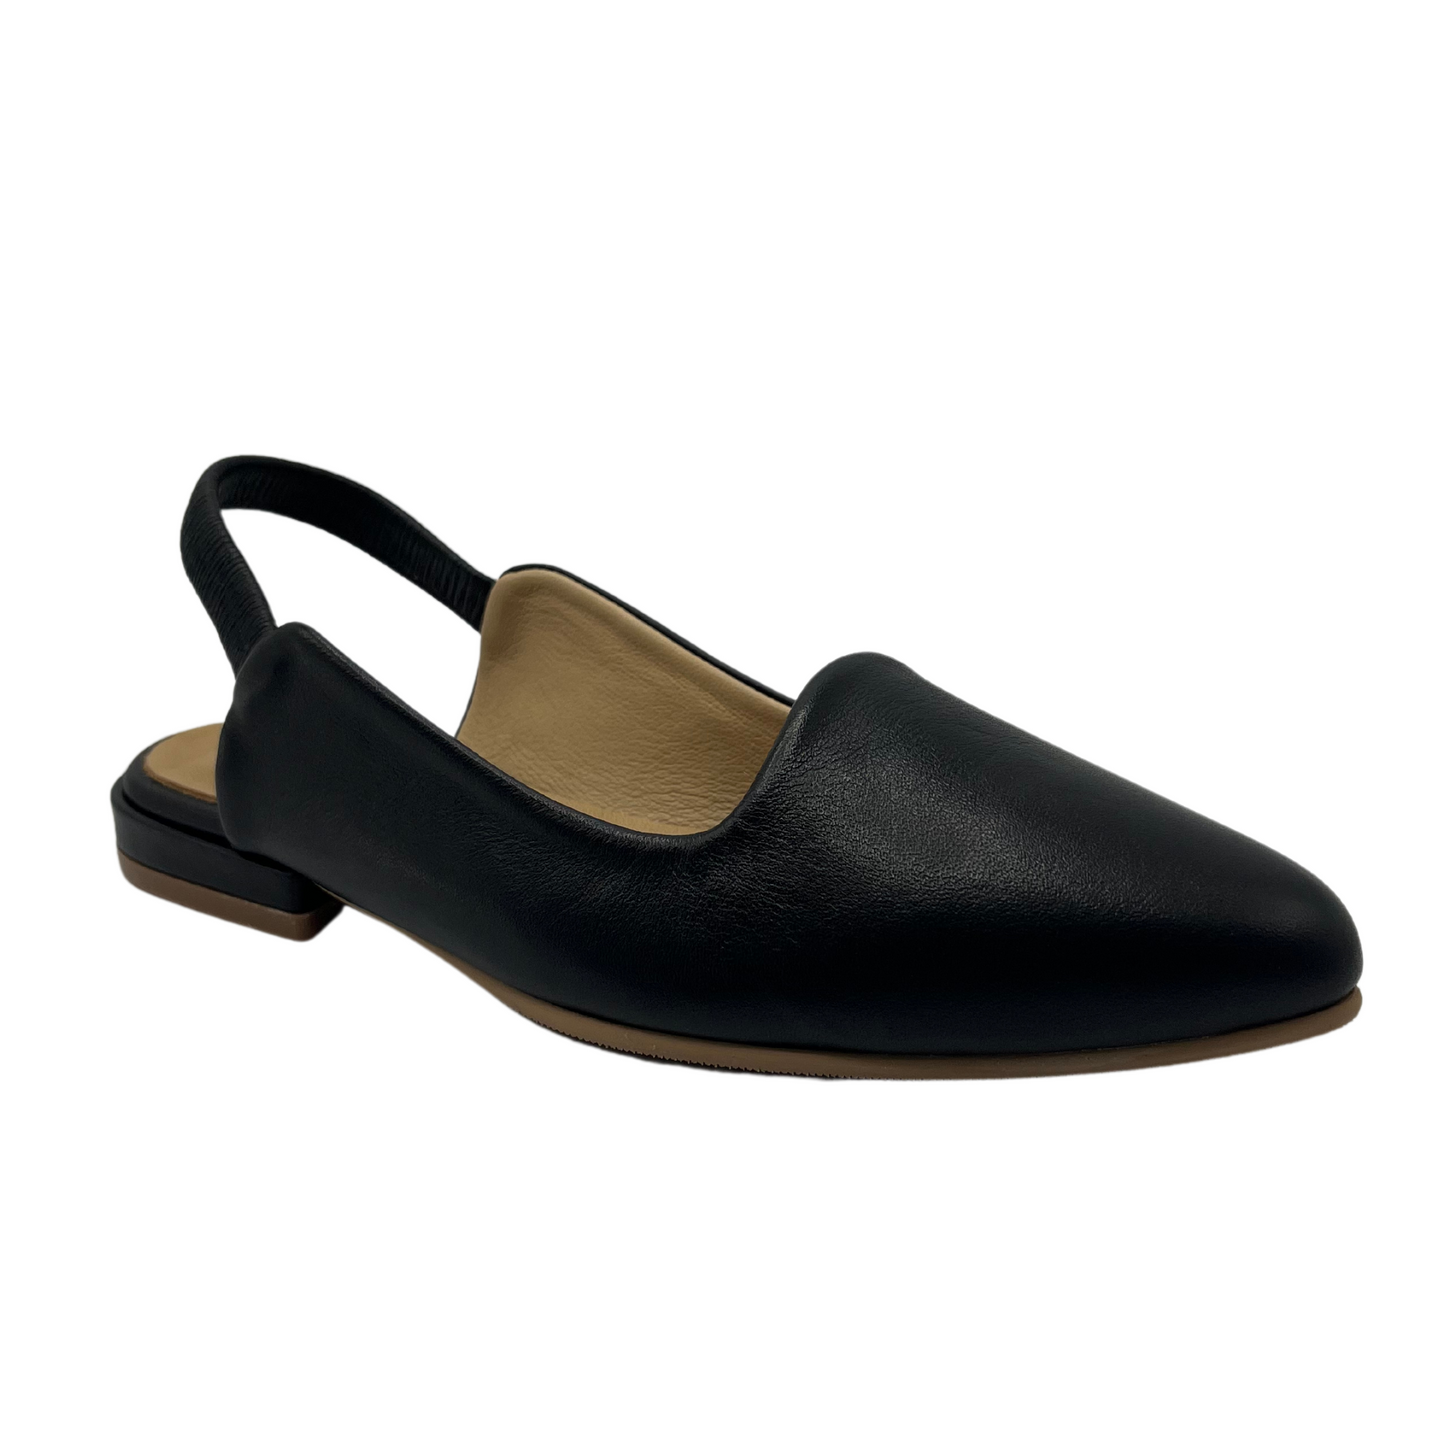 45 degree angled view of black leather flat with short block heel and slingback strap